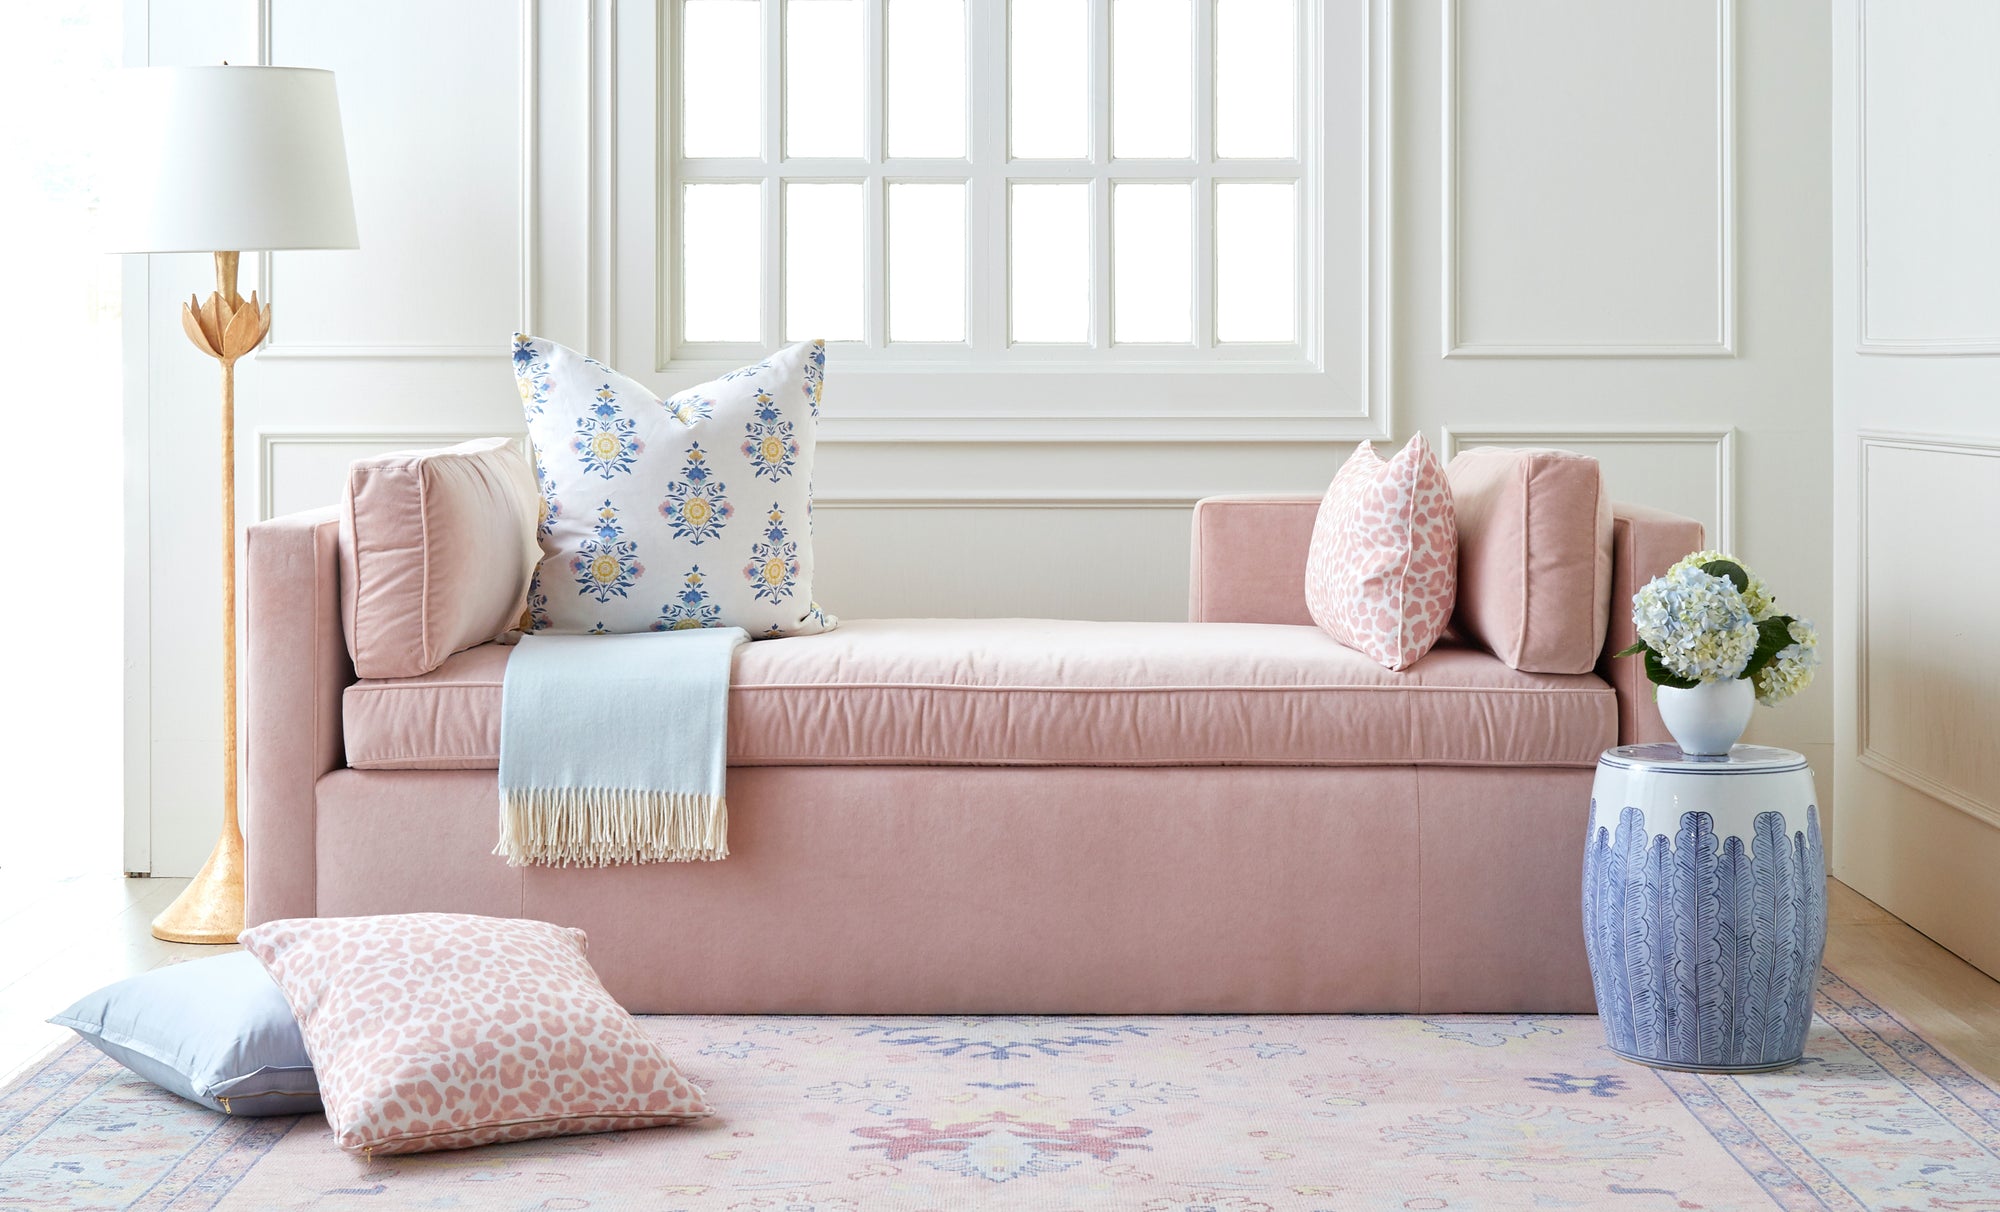 DAYBED DREAMS